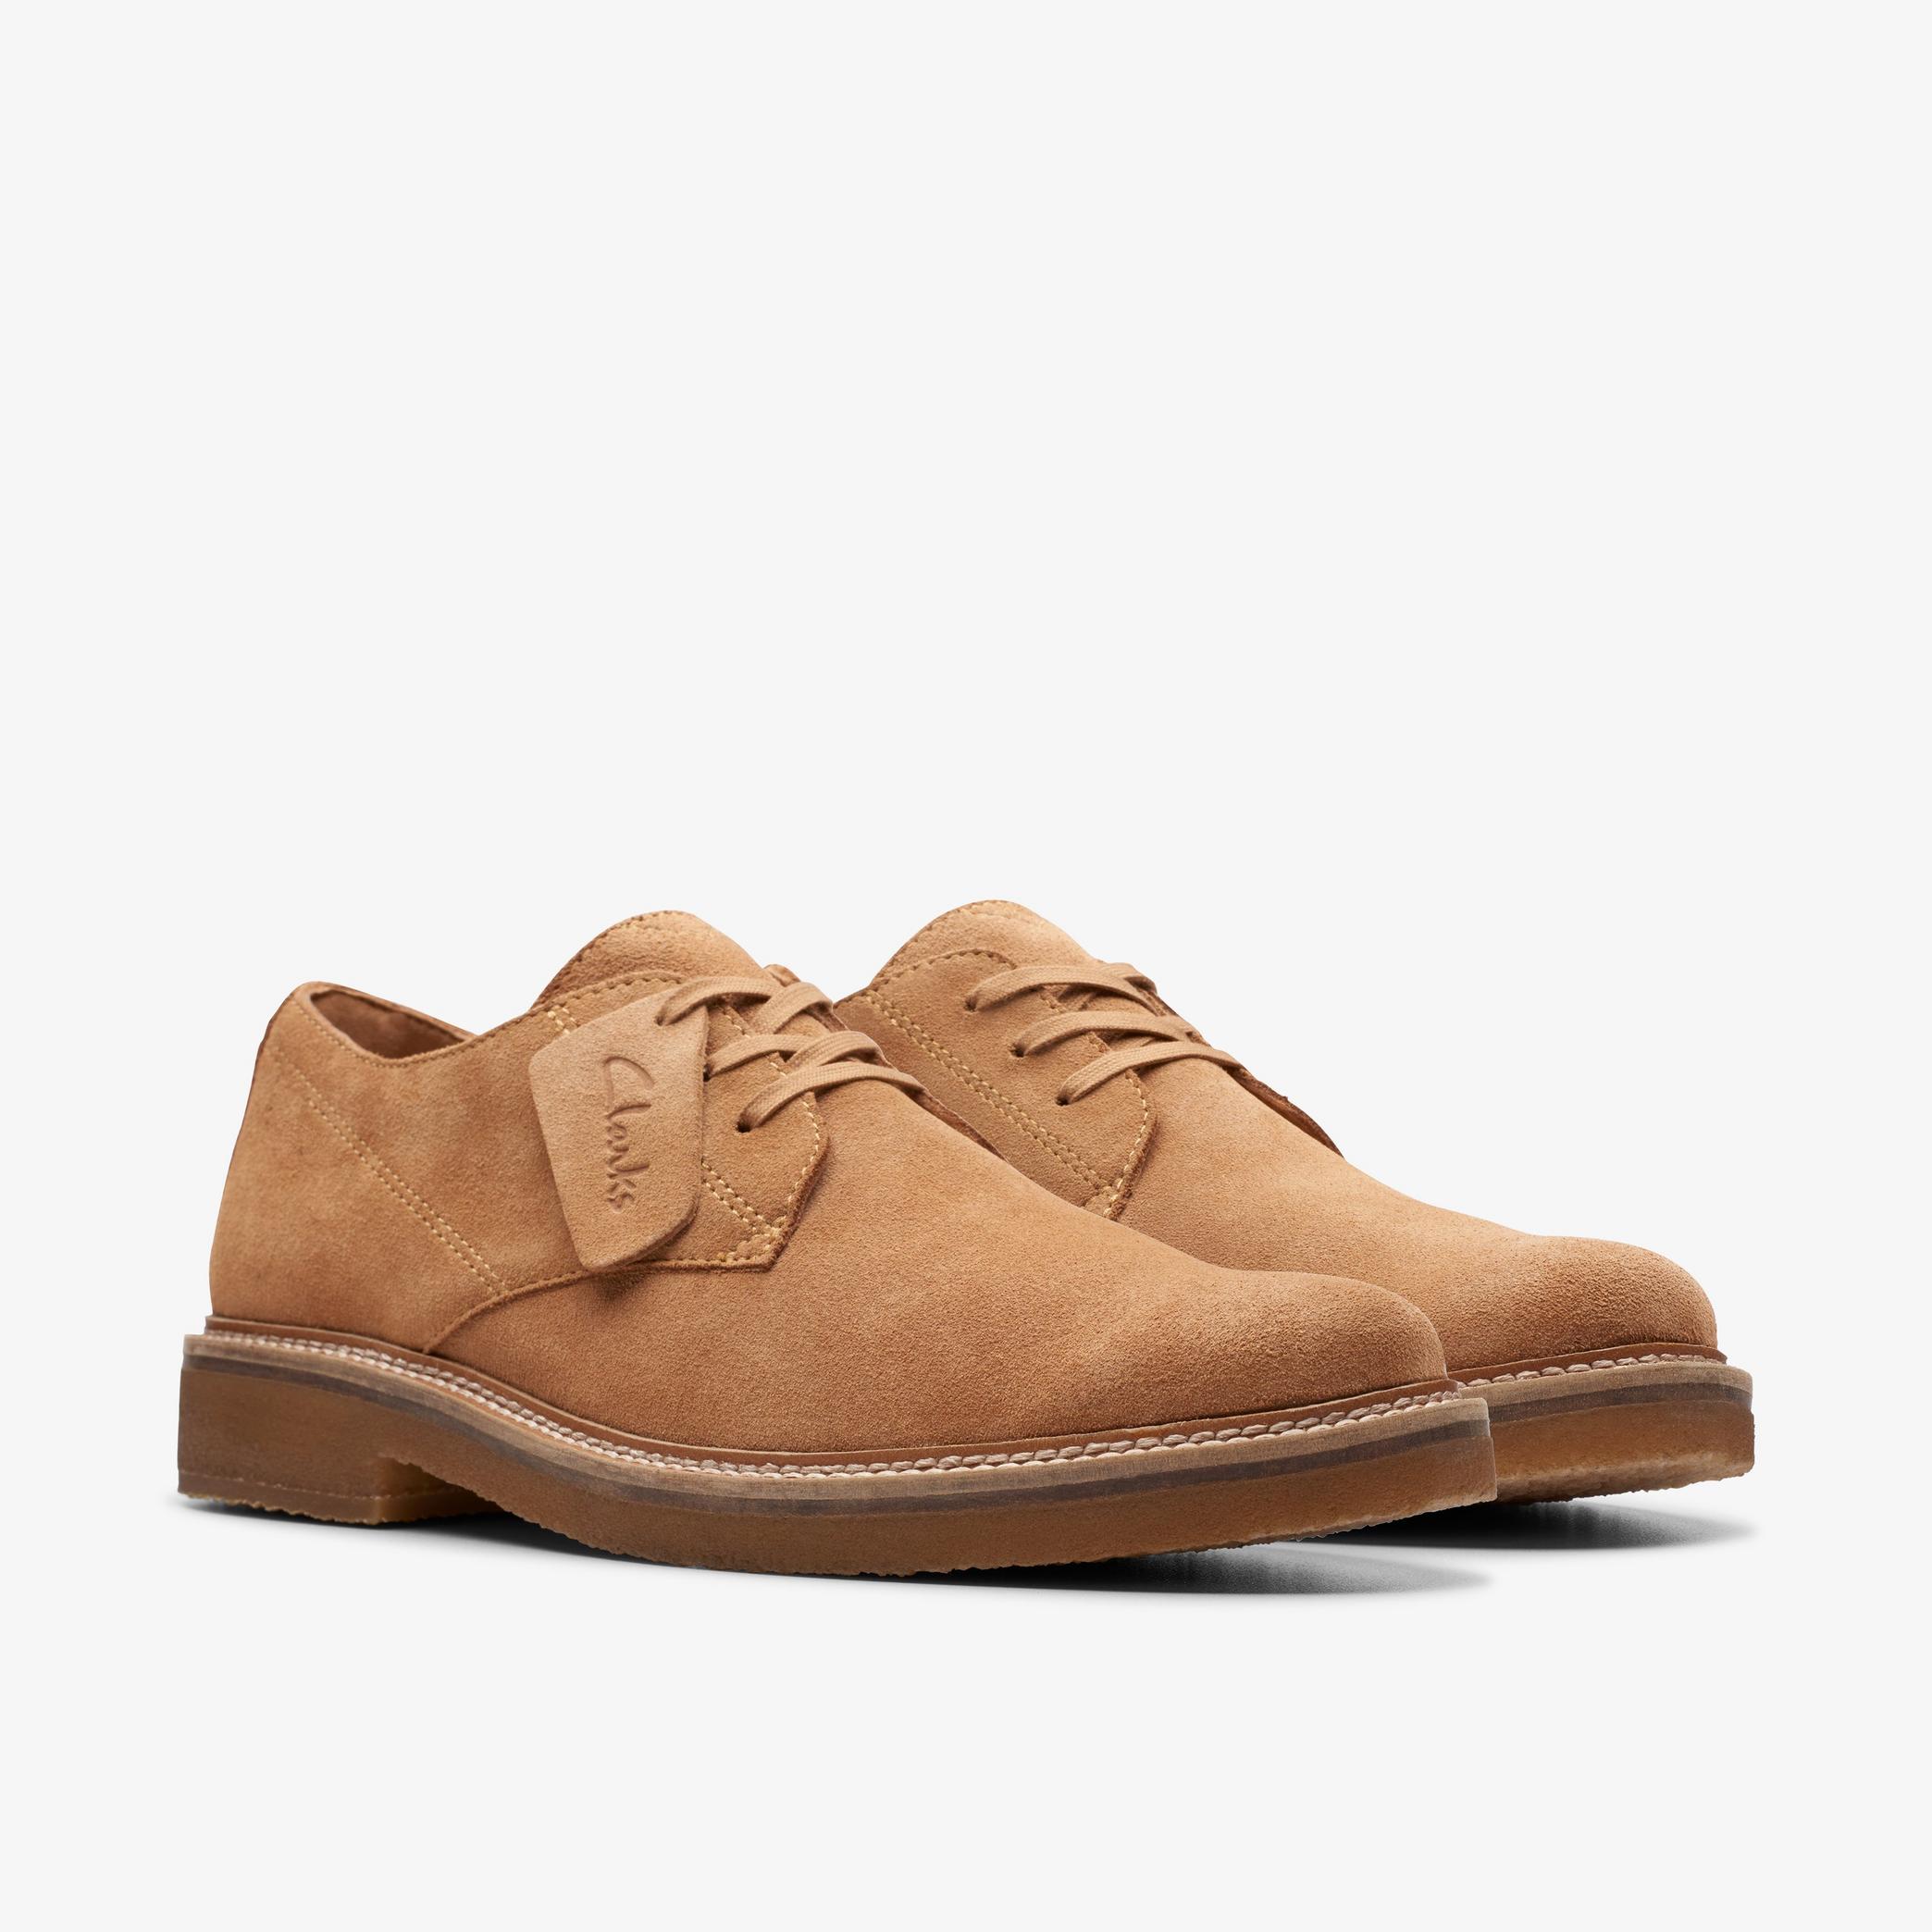 Clarkdale Derby Light Tan Suede Oxford Shoes, view 4 of 6